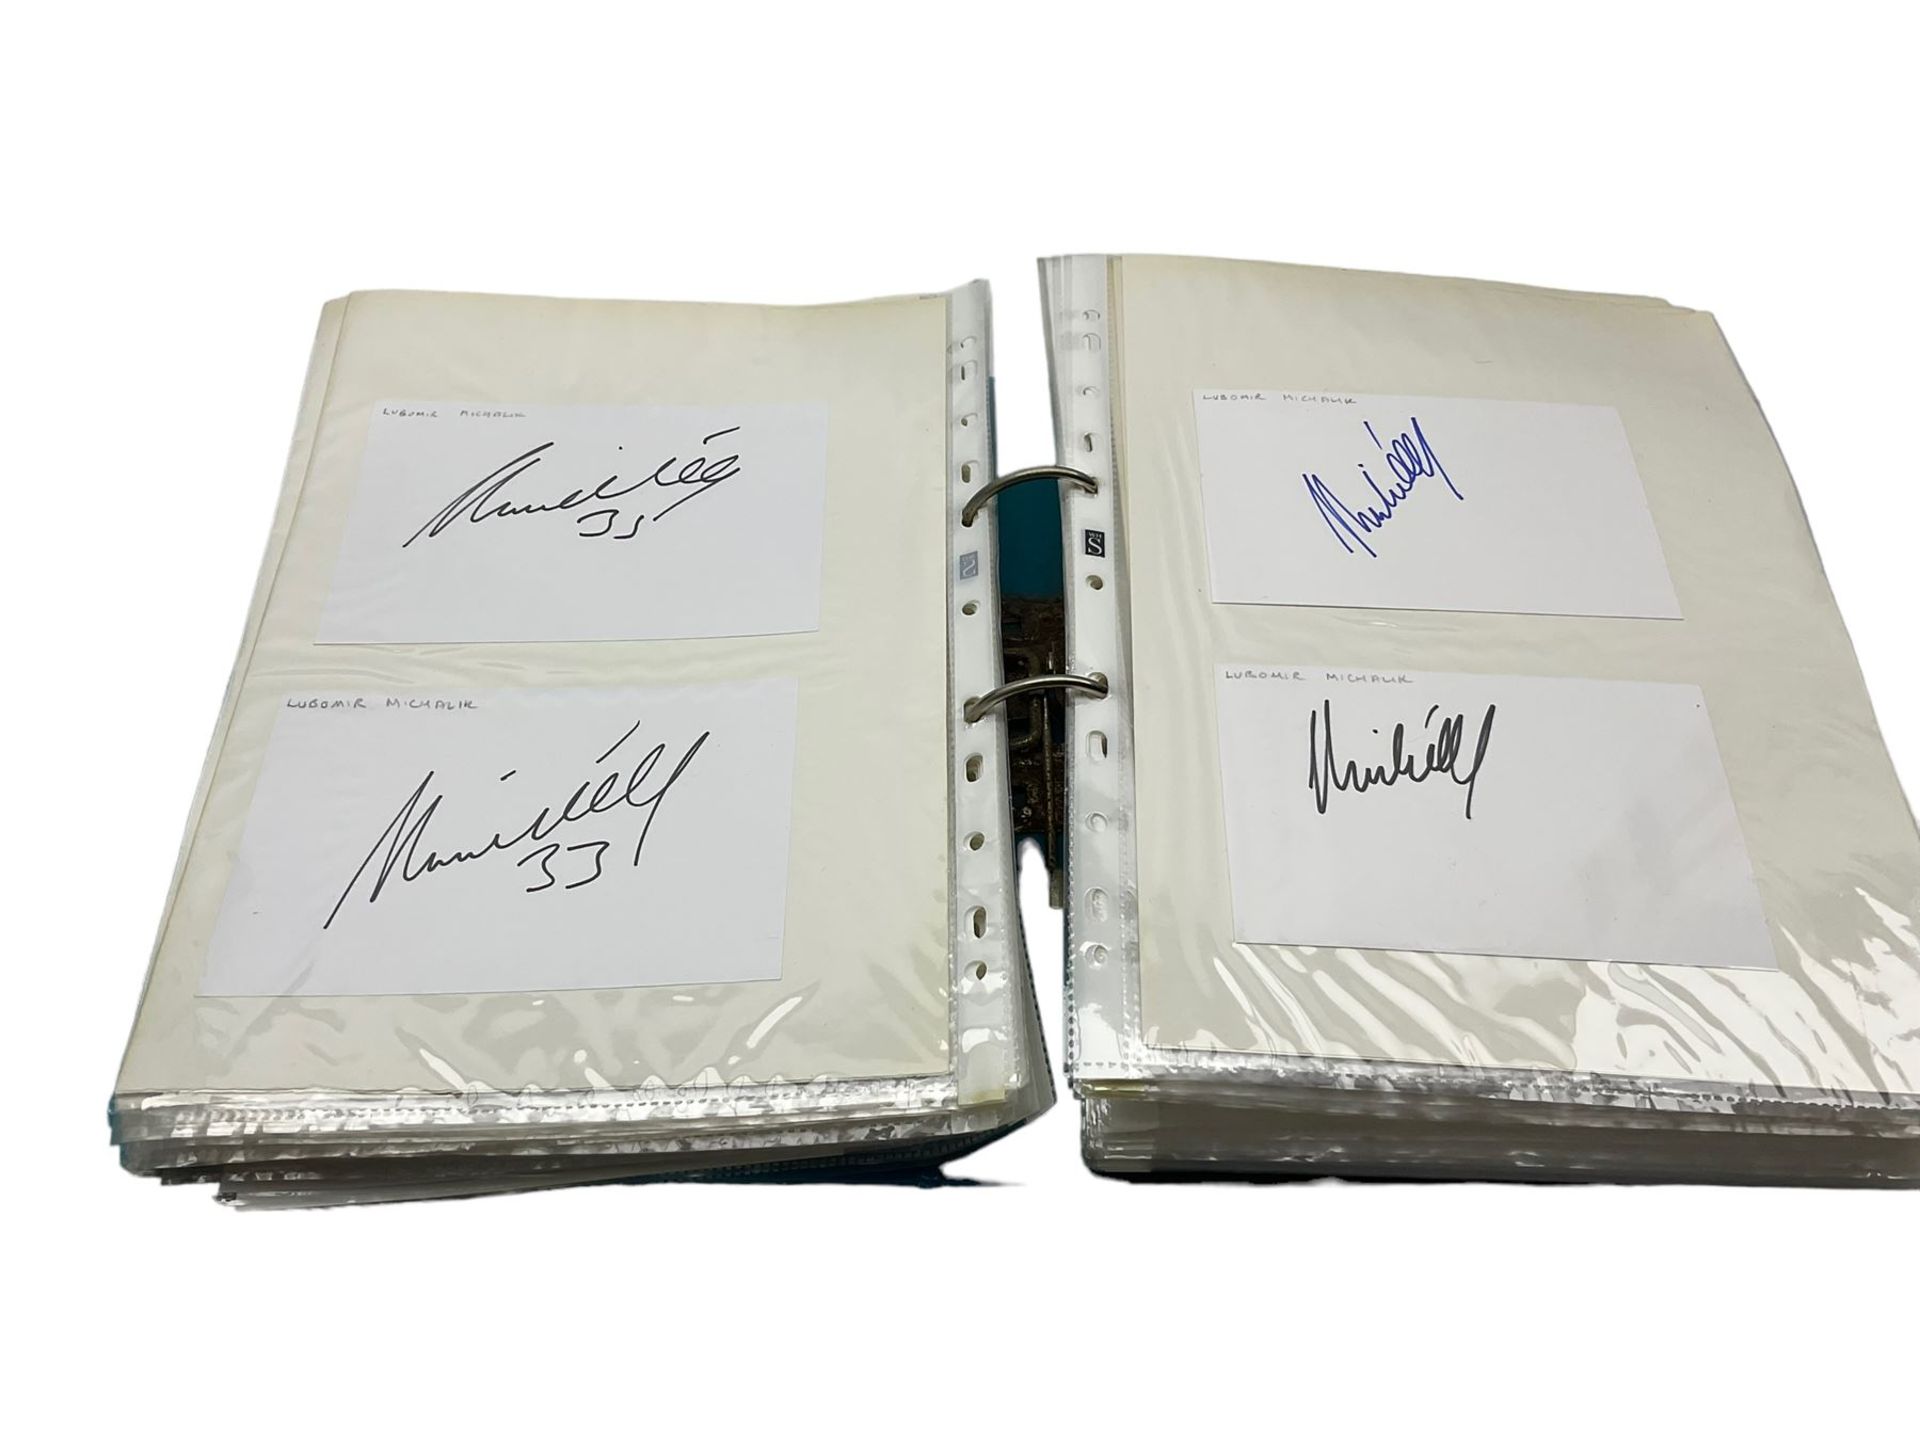 Leeds United football club - various autographs and signatures including Garry Kelly - Image 5 of 10